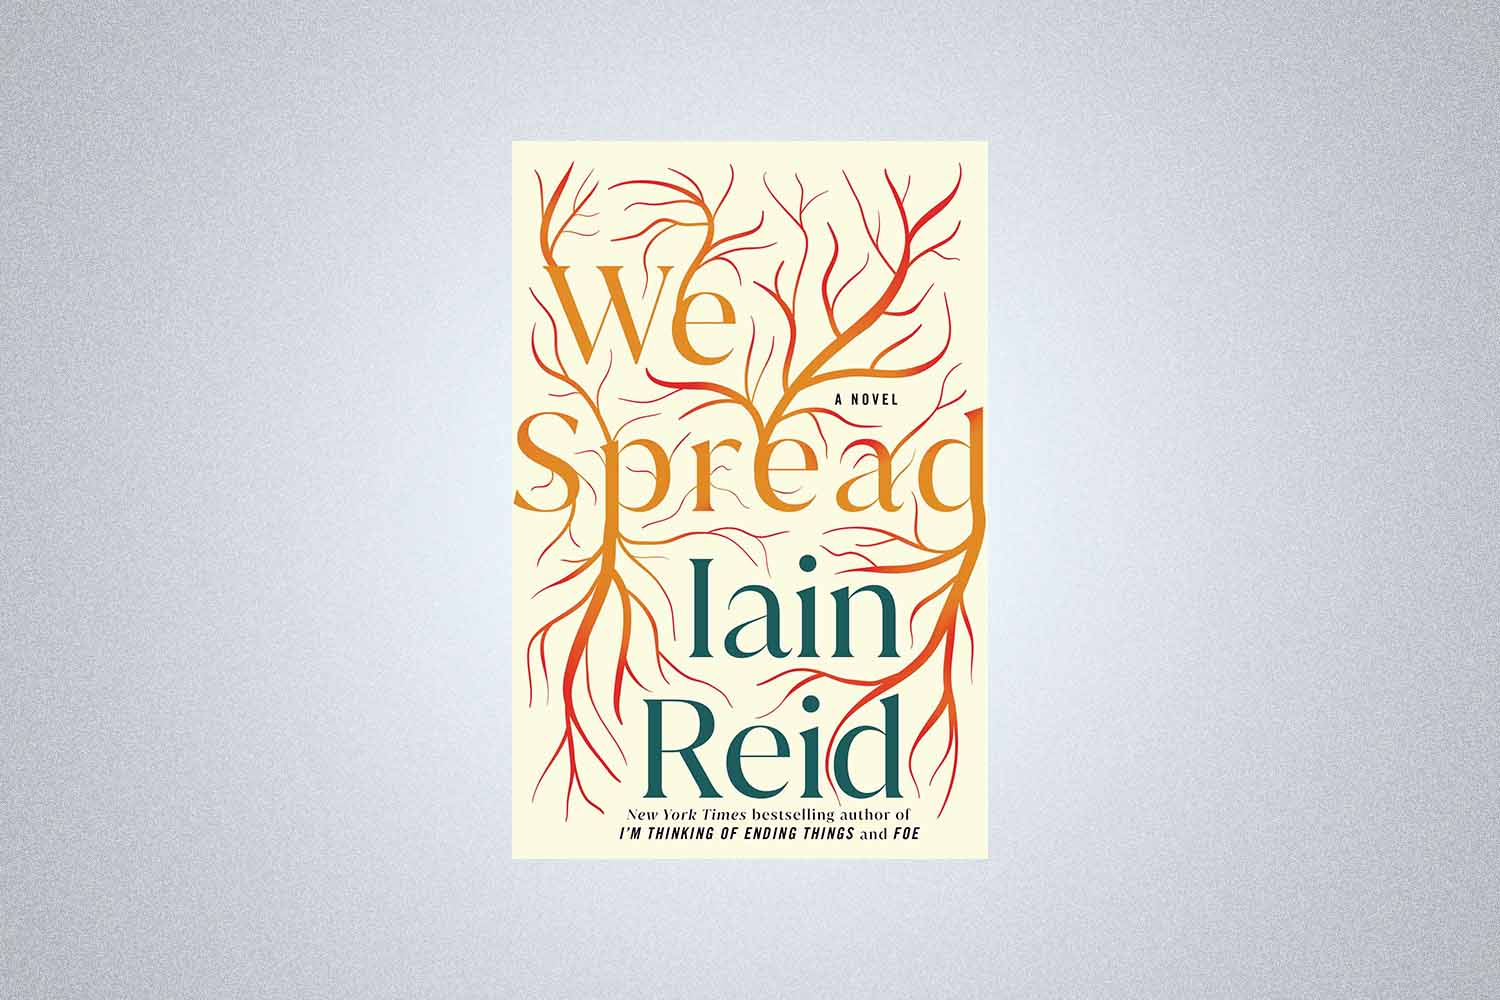 We Spread book cover by Iain Reid